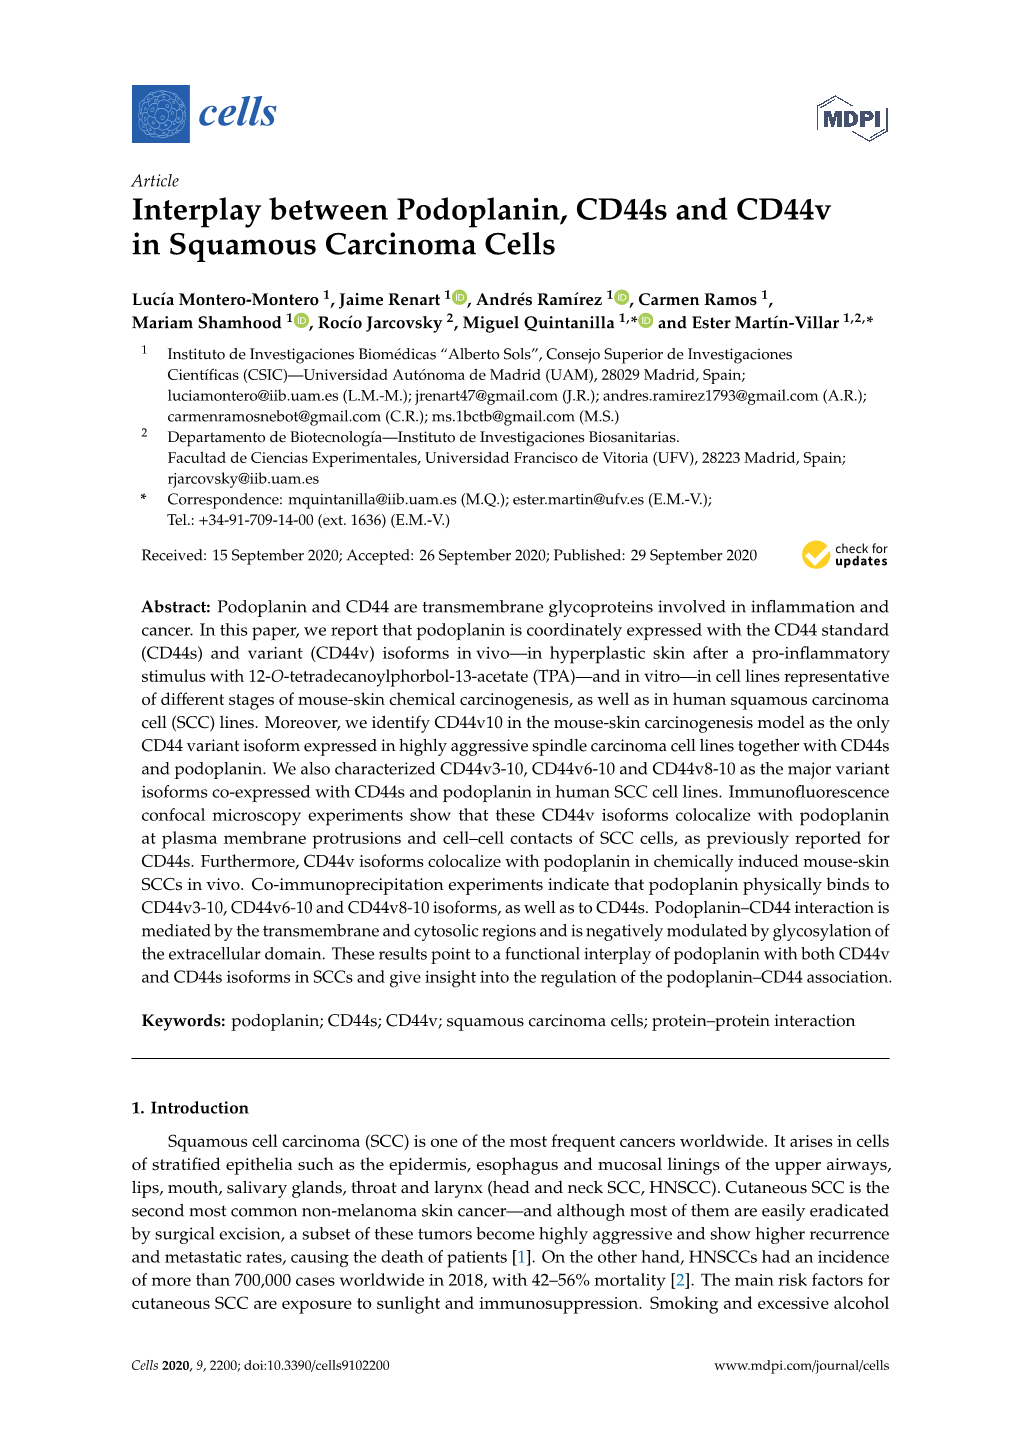 Interplay Between Podoplanin, Cd44s and Cd44v in Squamous Carcinoma Cells